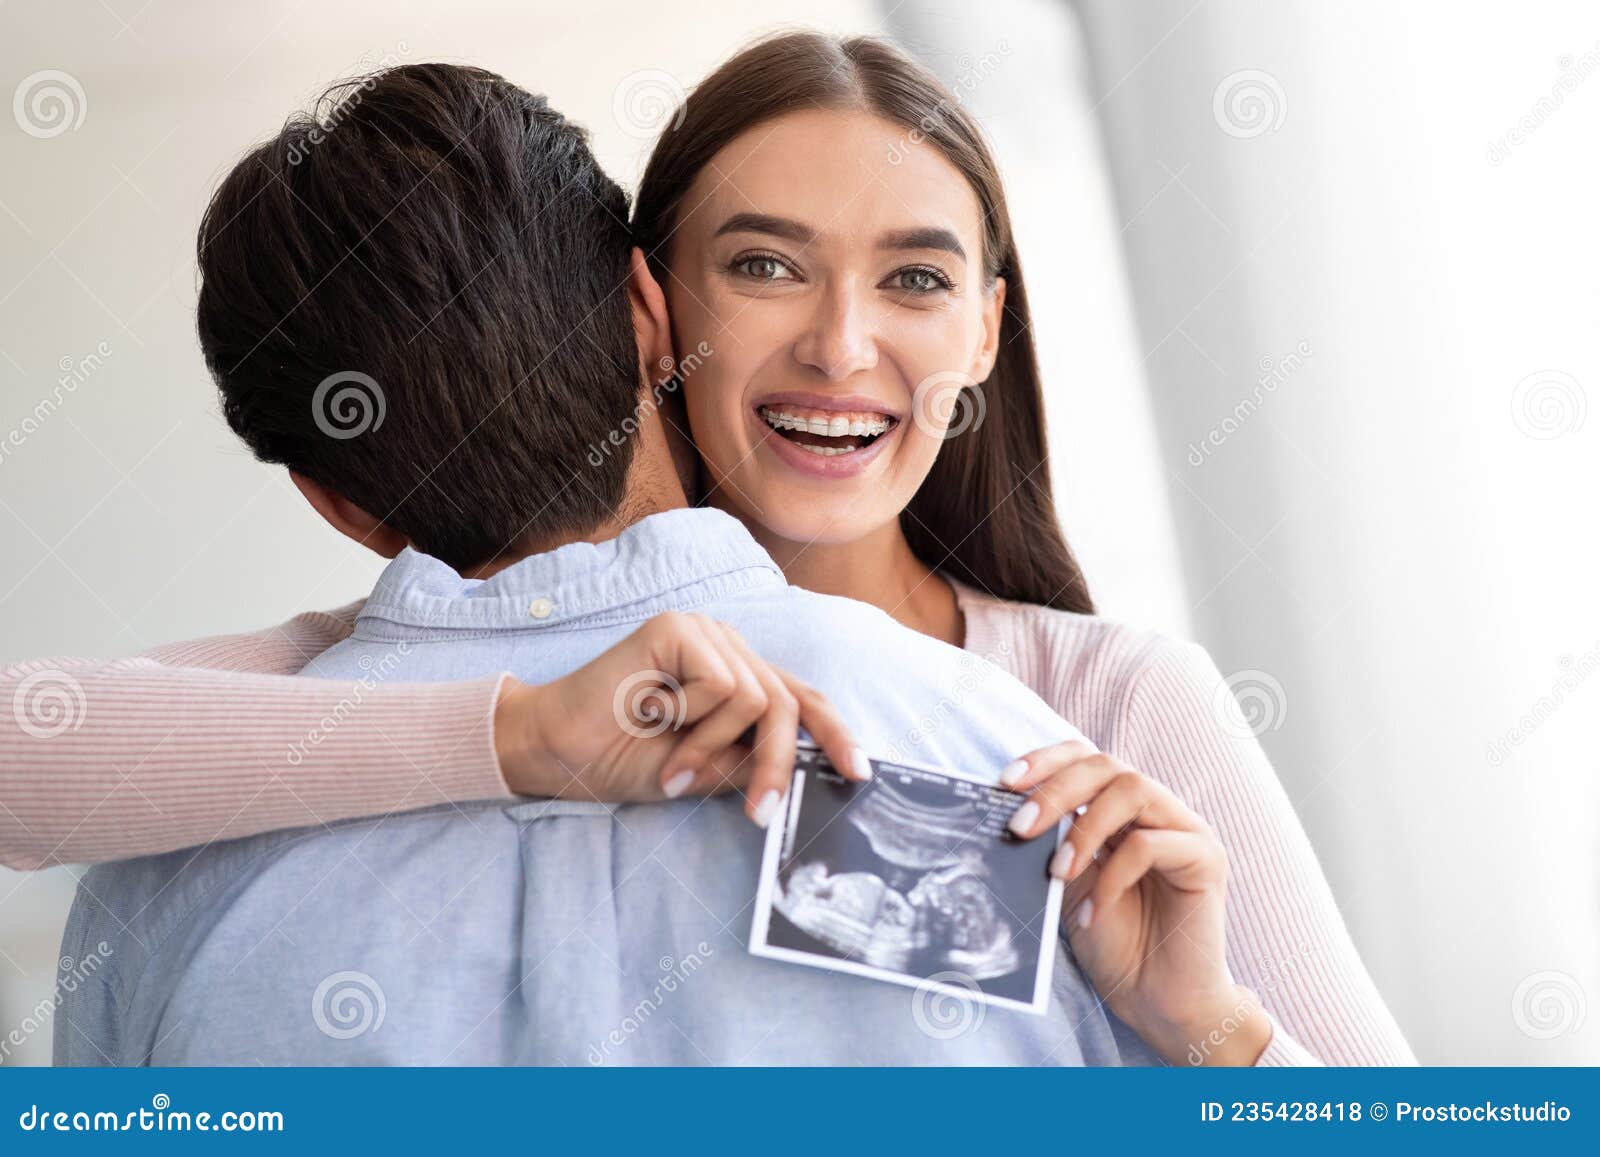 Happy European Young Wife Hugs Husband and Holds Ultrasound Picture of Baby in Living Room Interior Stock Photo